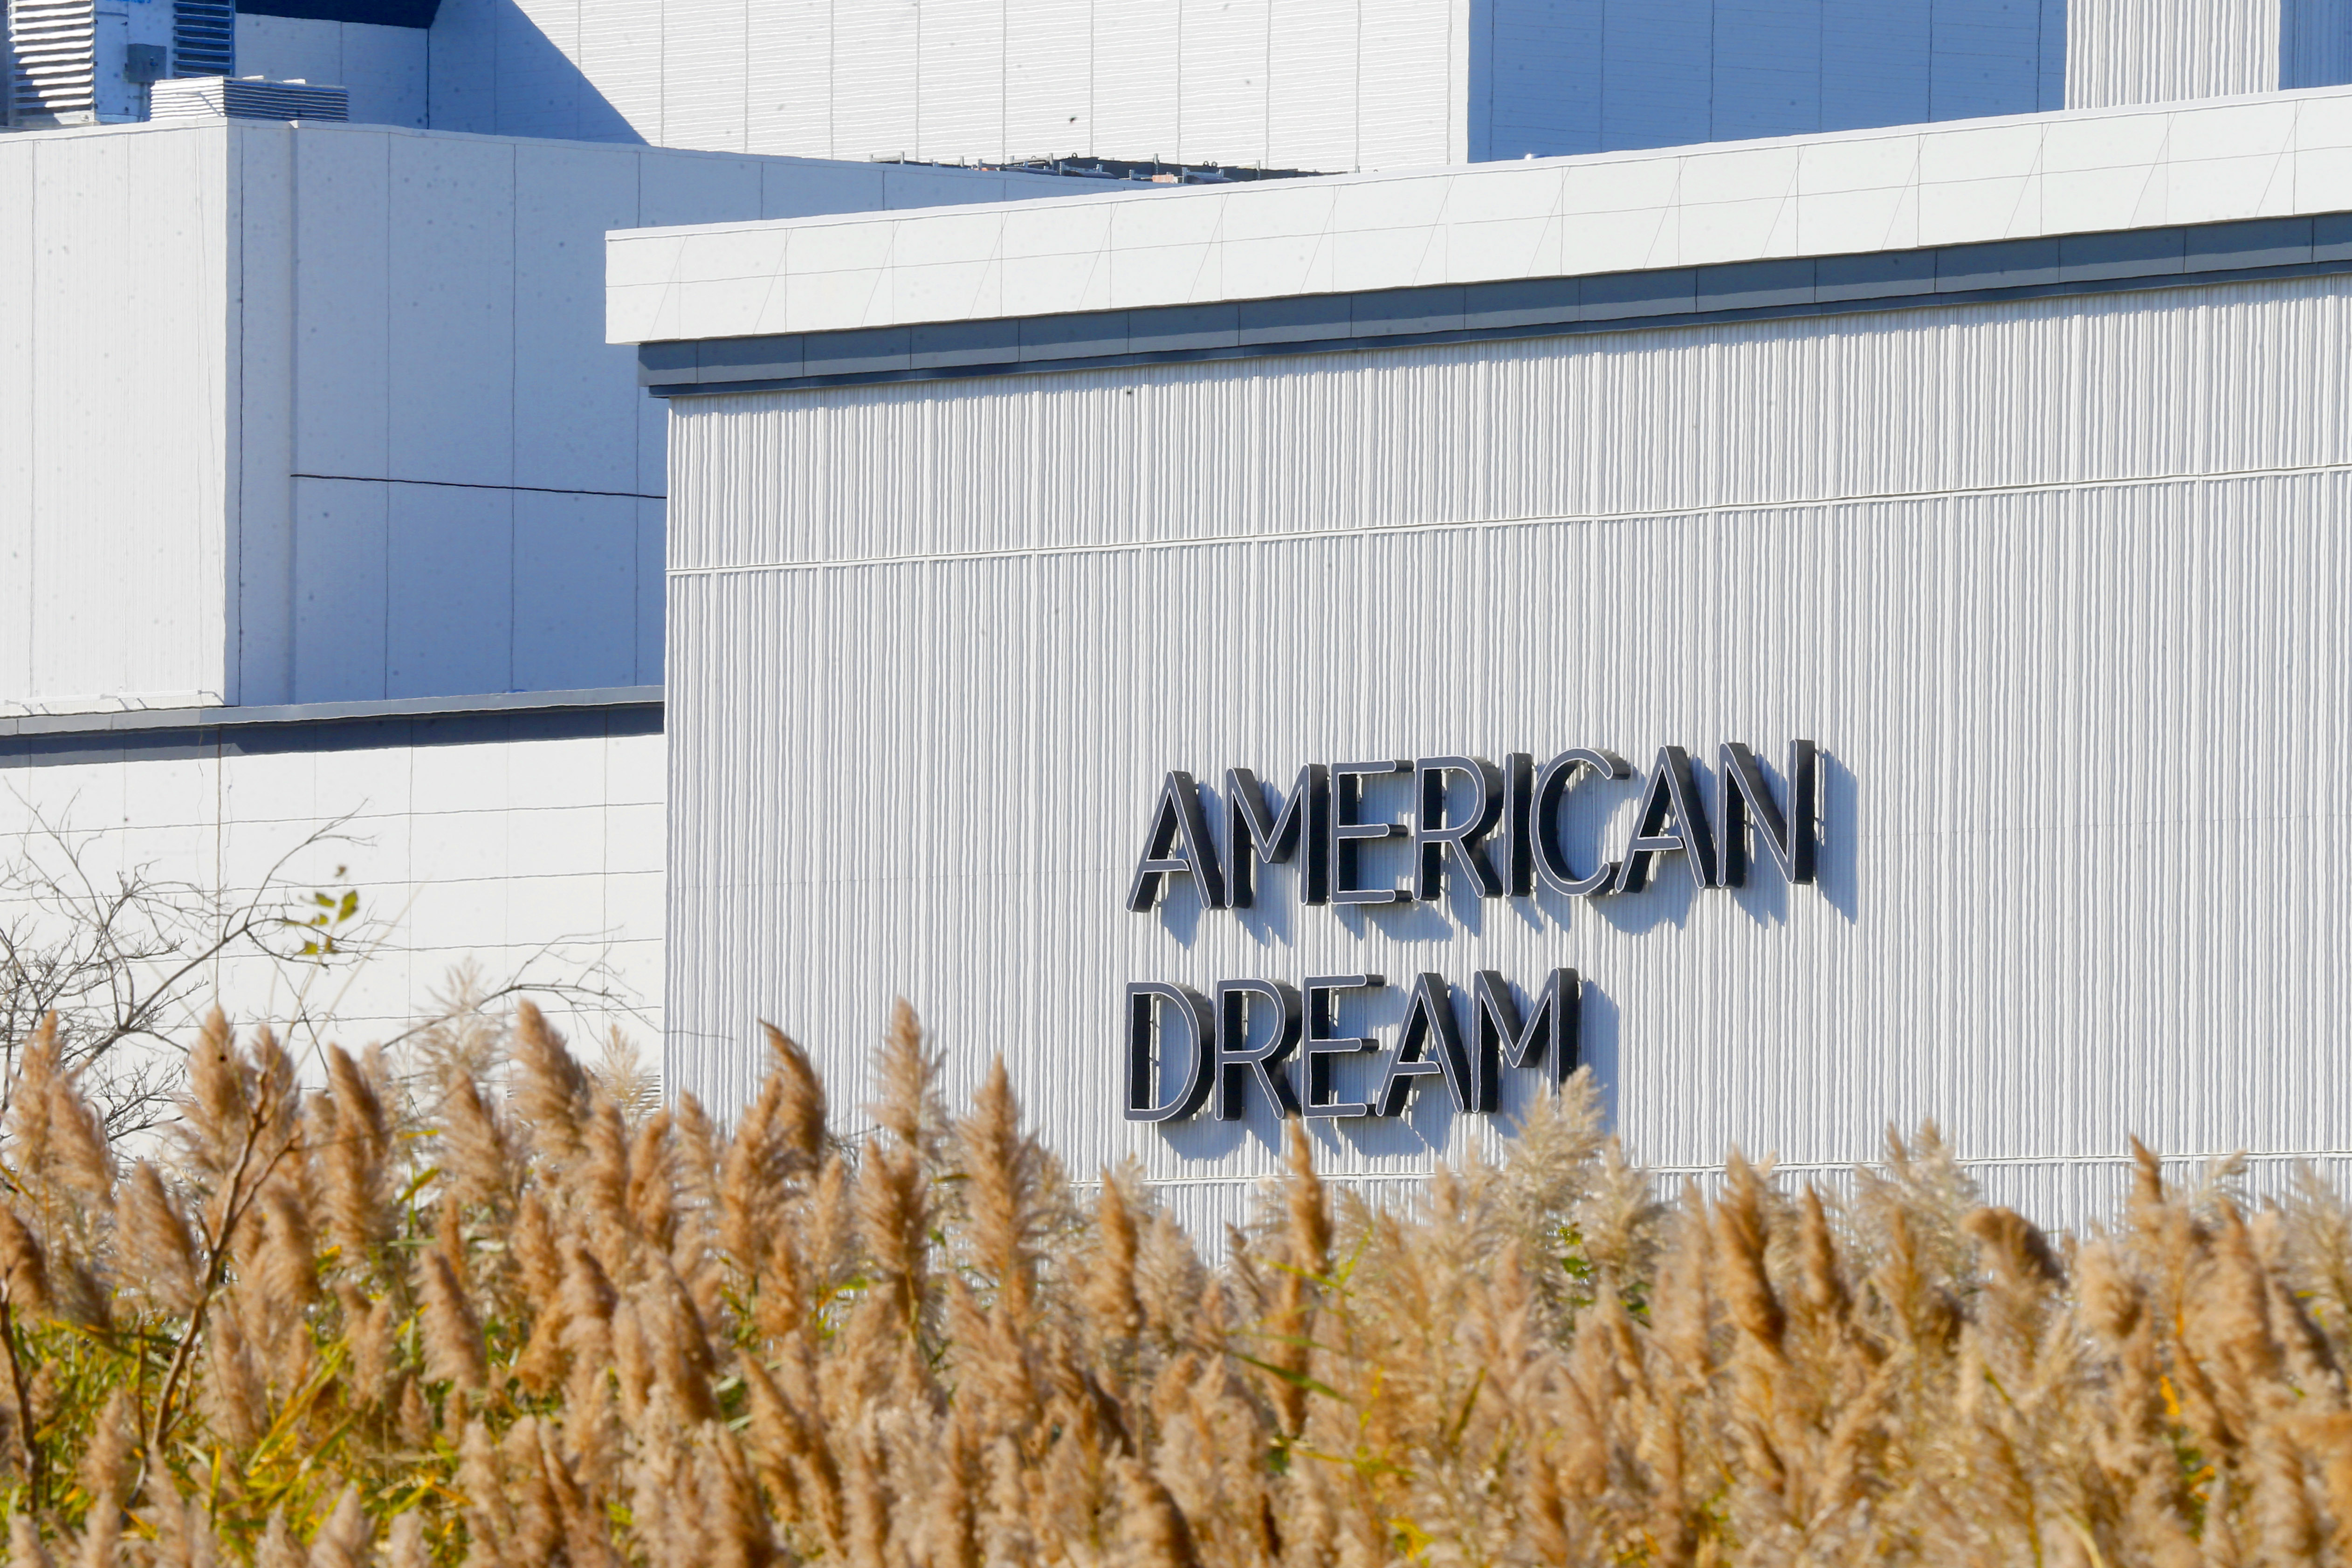 American Dream: A Guide to Where to Shop, Eat and Play – WWD